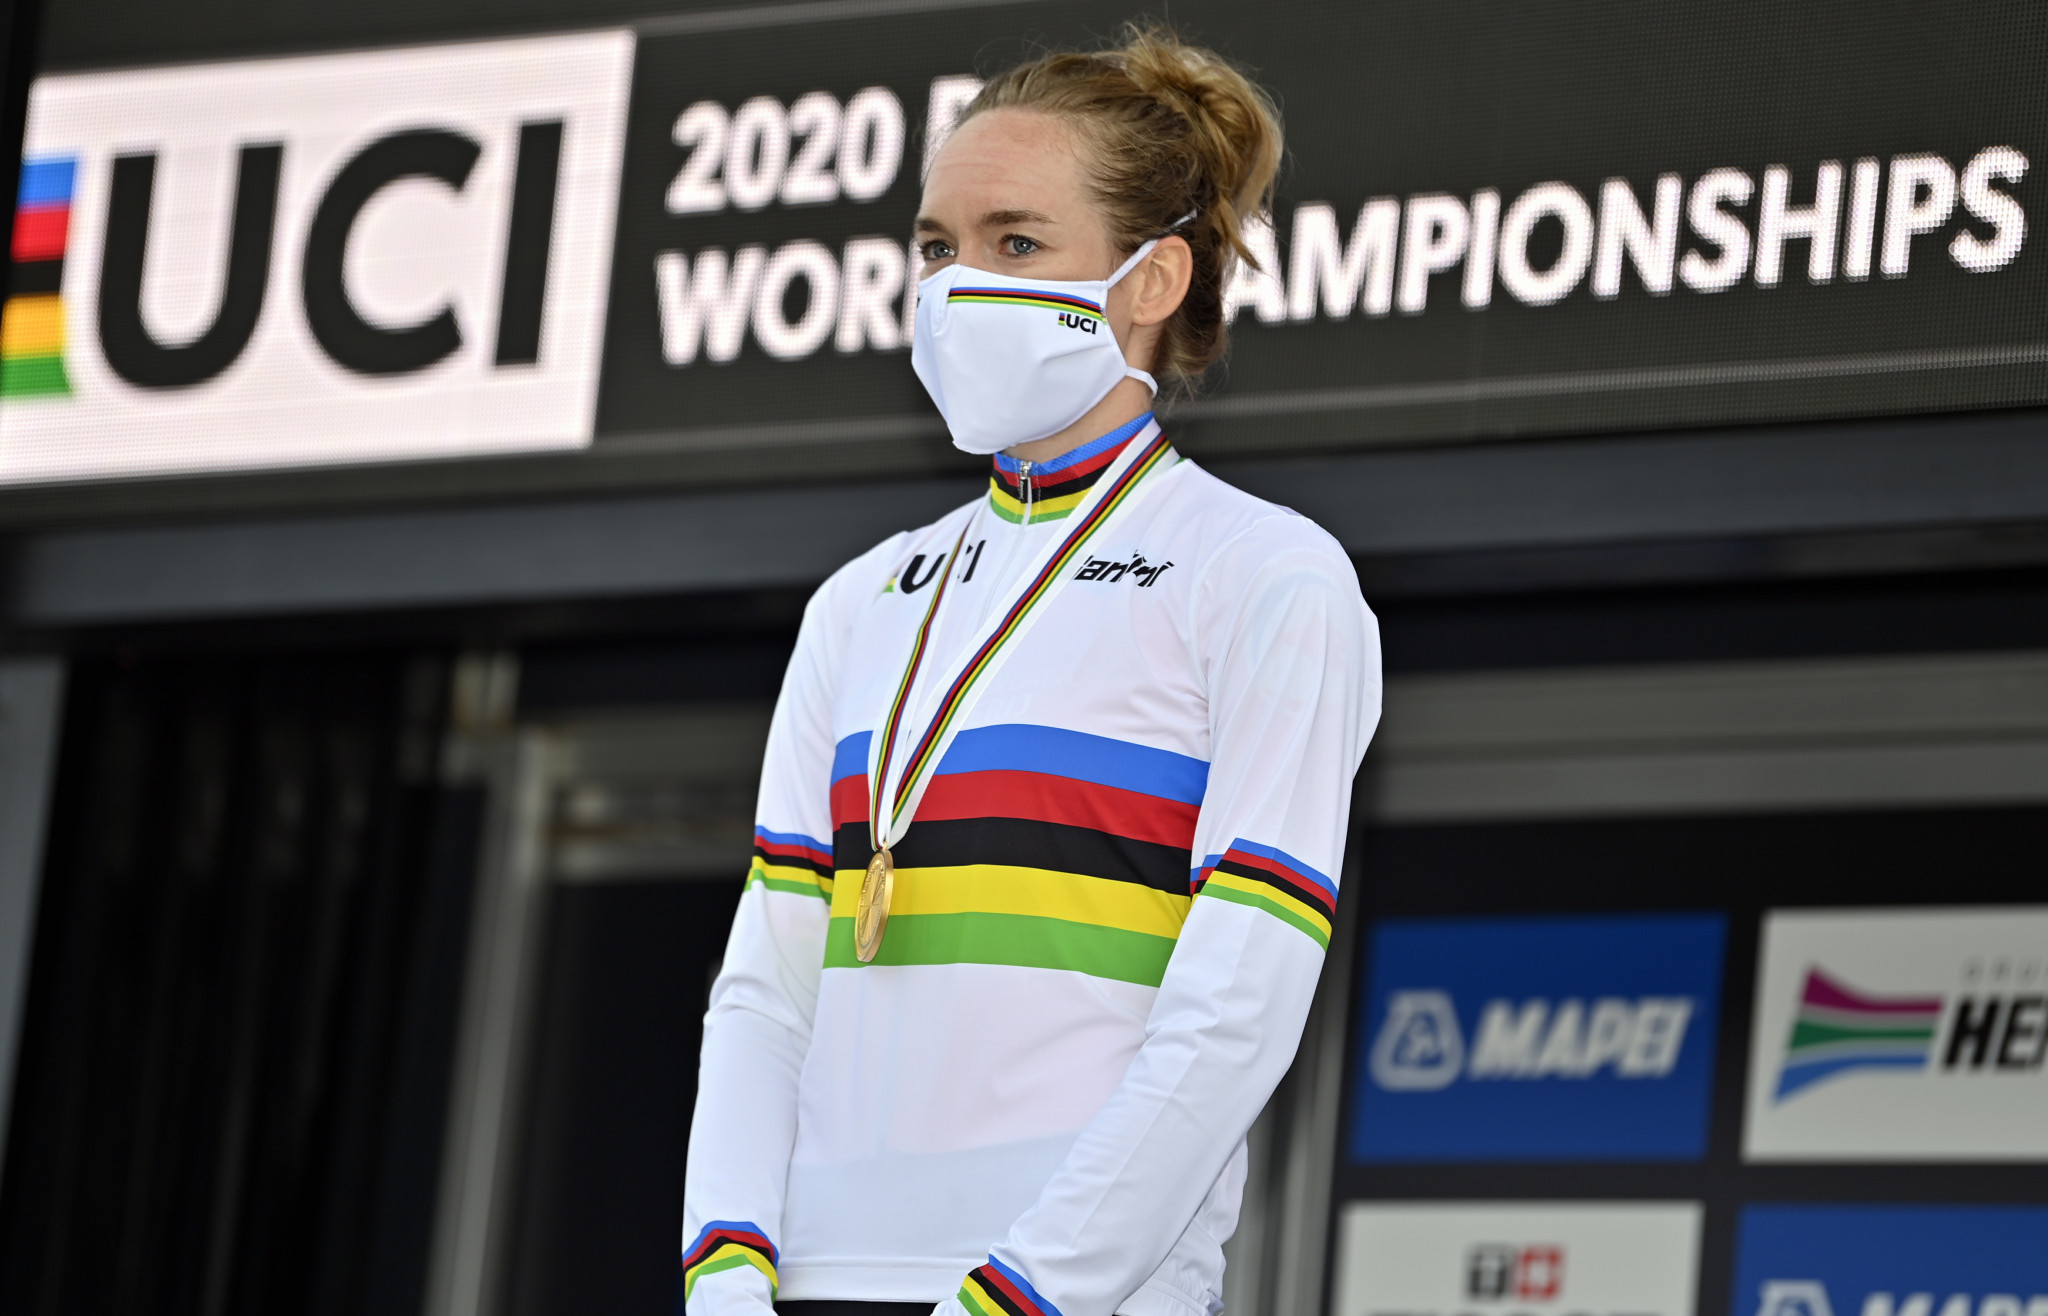 Van der Breggen wins first time trial title as Dygert crashes at UCI Road World Championships